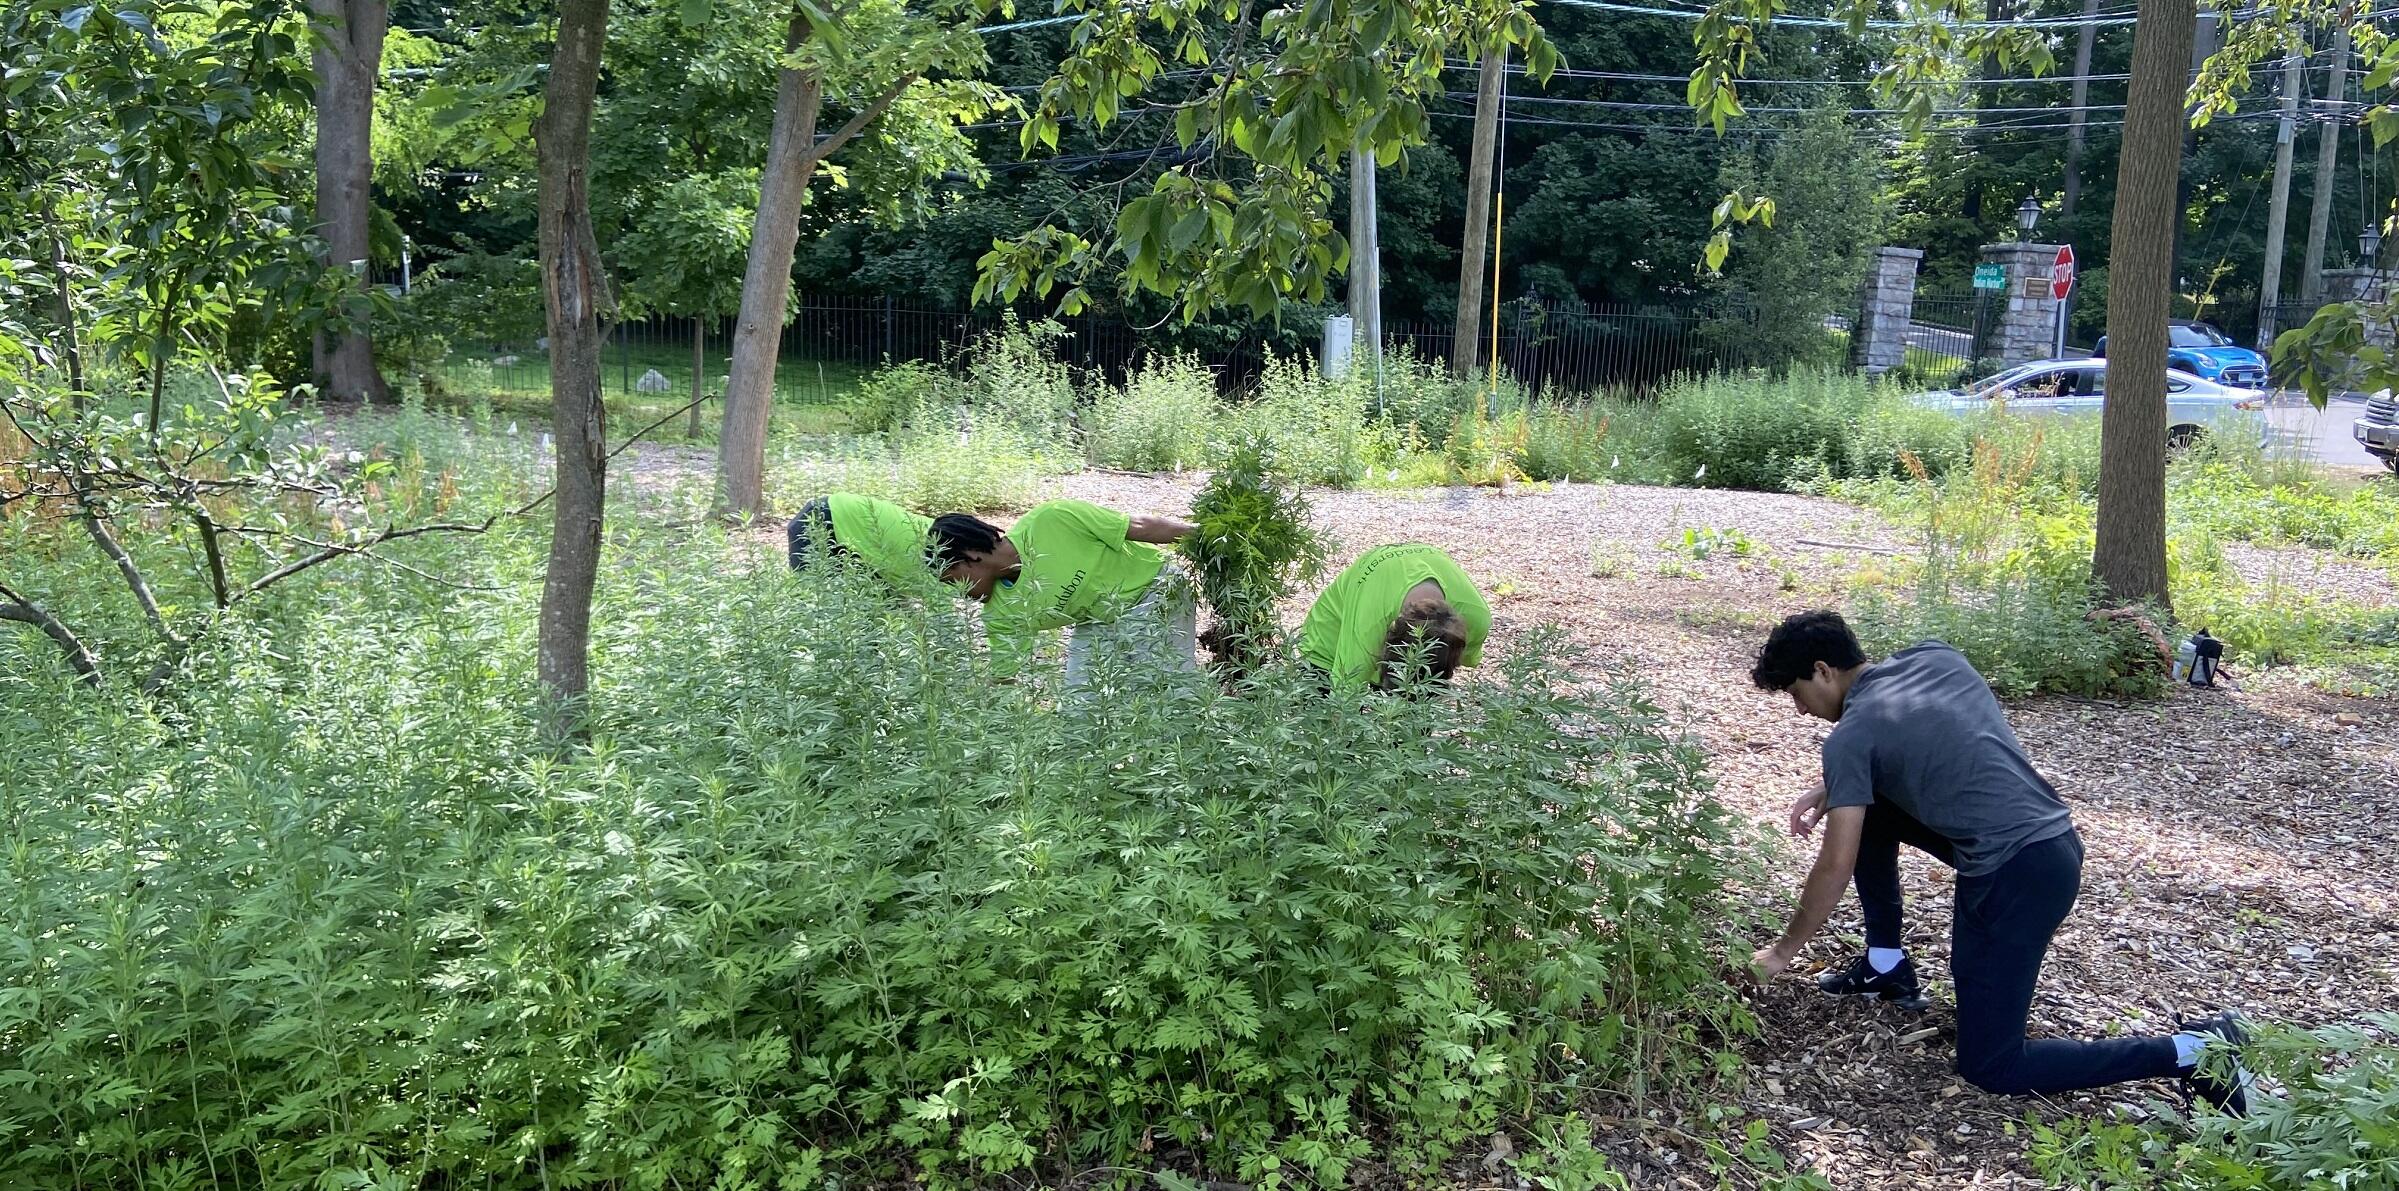 Four teenagers are bent over pulling mugwort from the ground, there is a large patch in front of them obscuring half their bodies' from view.